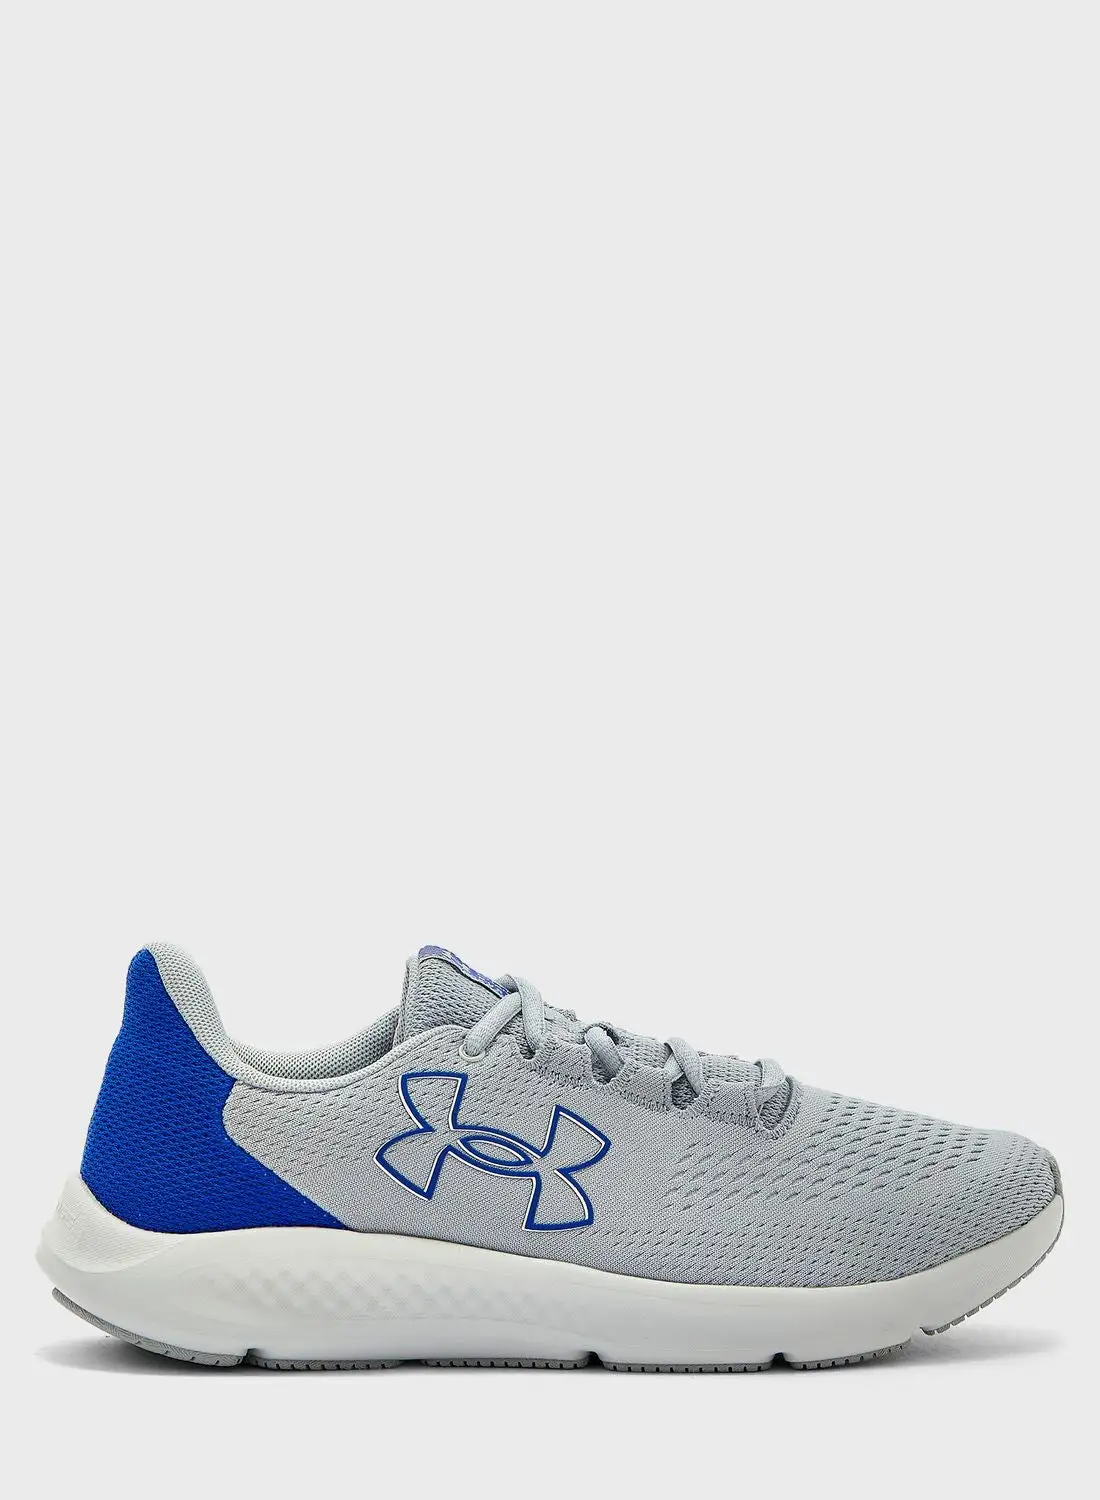 UNDER ARMOUR Charged Pursuit 3 Bl